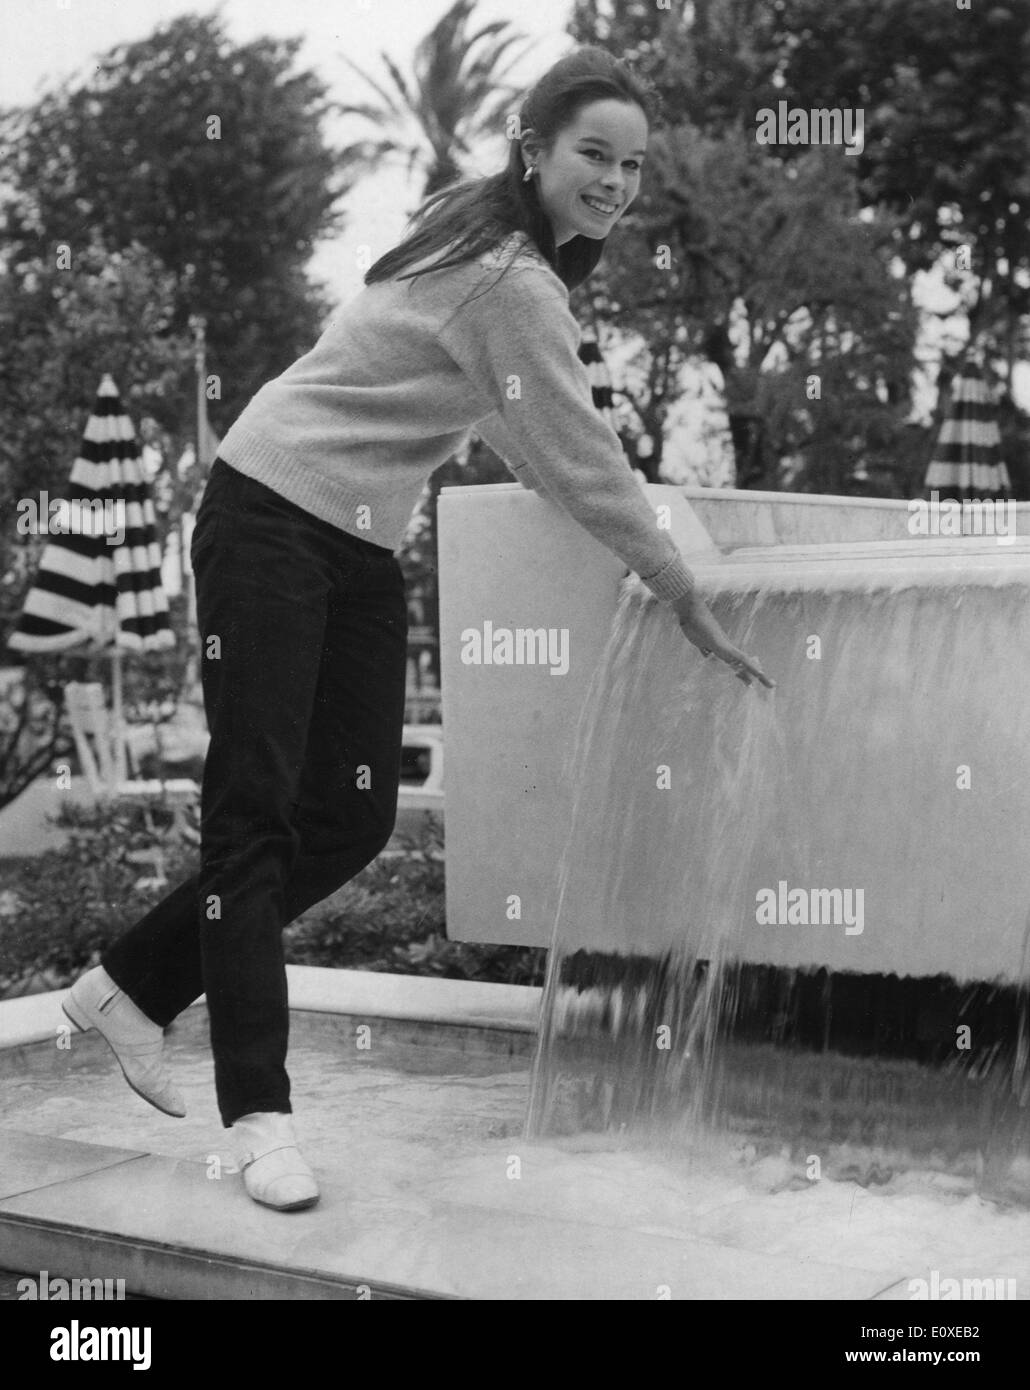 May 14, 1966 - Cannes, France - Ballet Dancer GERALDINE CHAPLIN plays in a fountain at her hotel before attending the premiere of the film, 'Doctor Zhivago.' Stock Photo